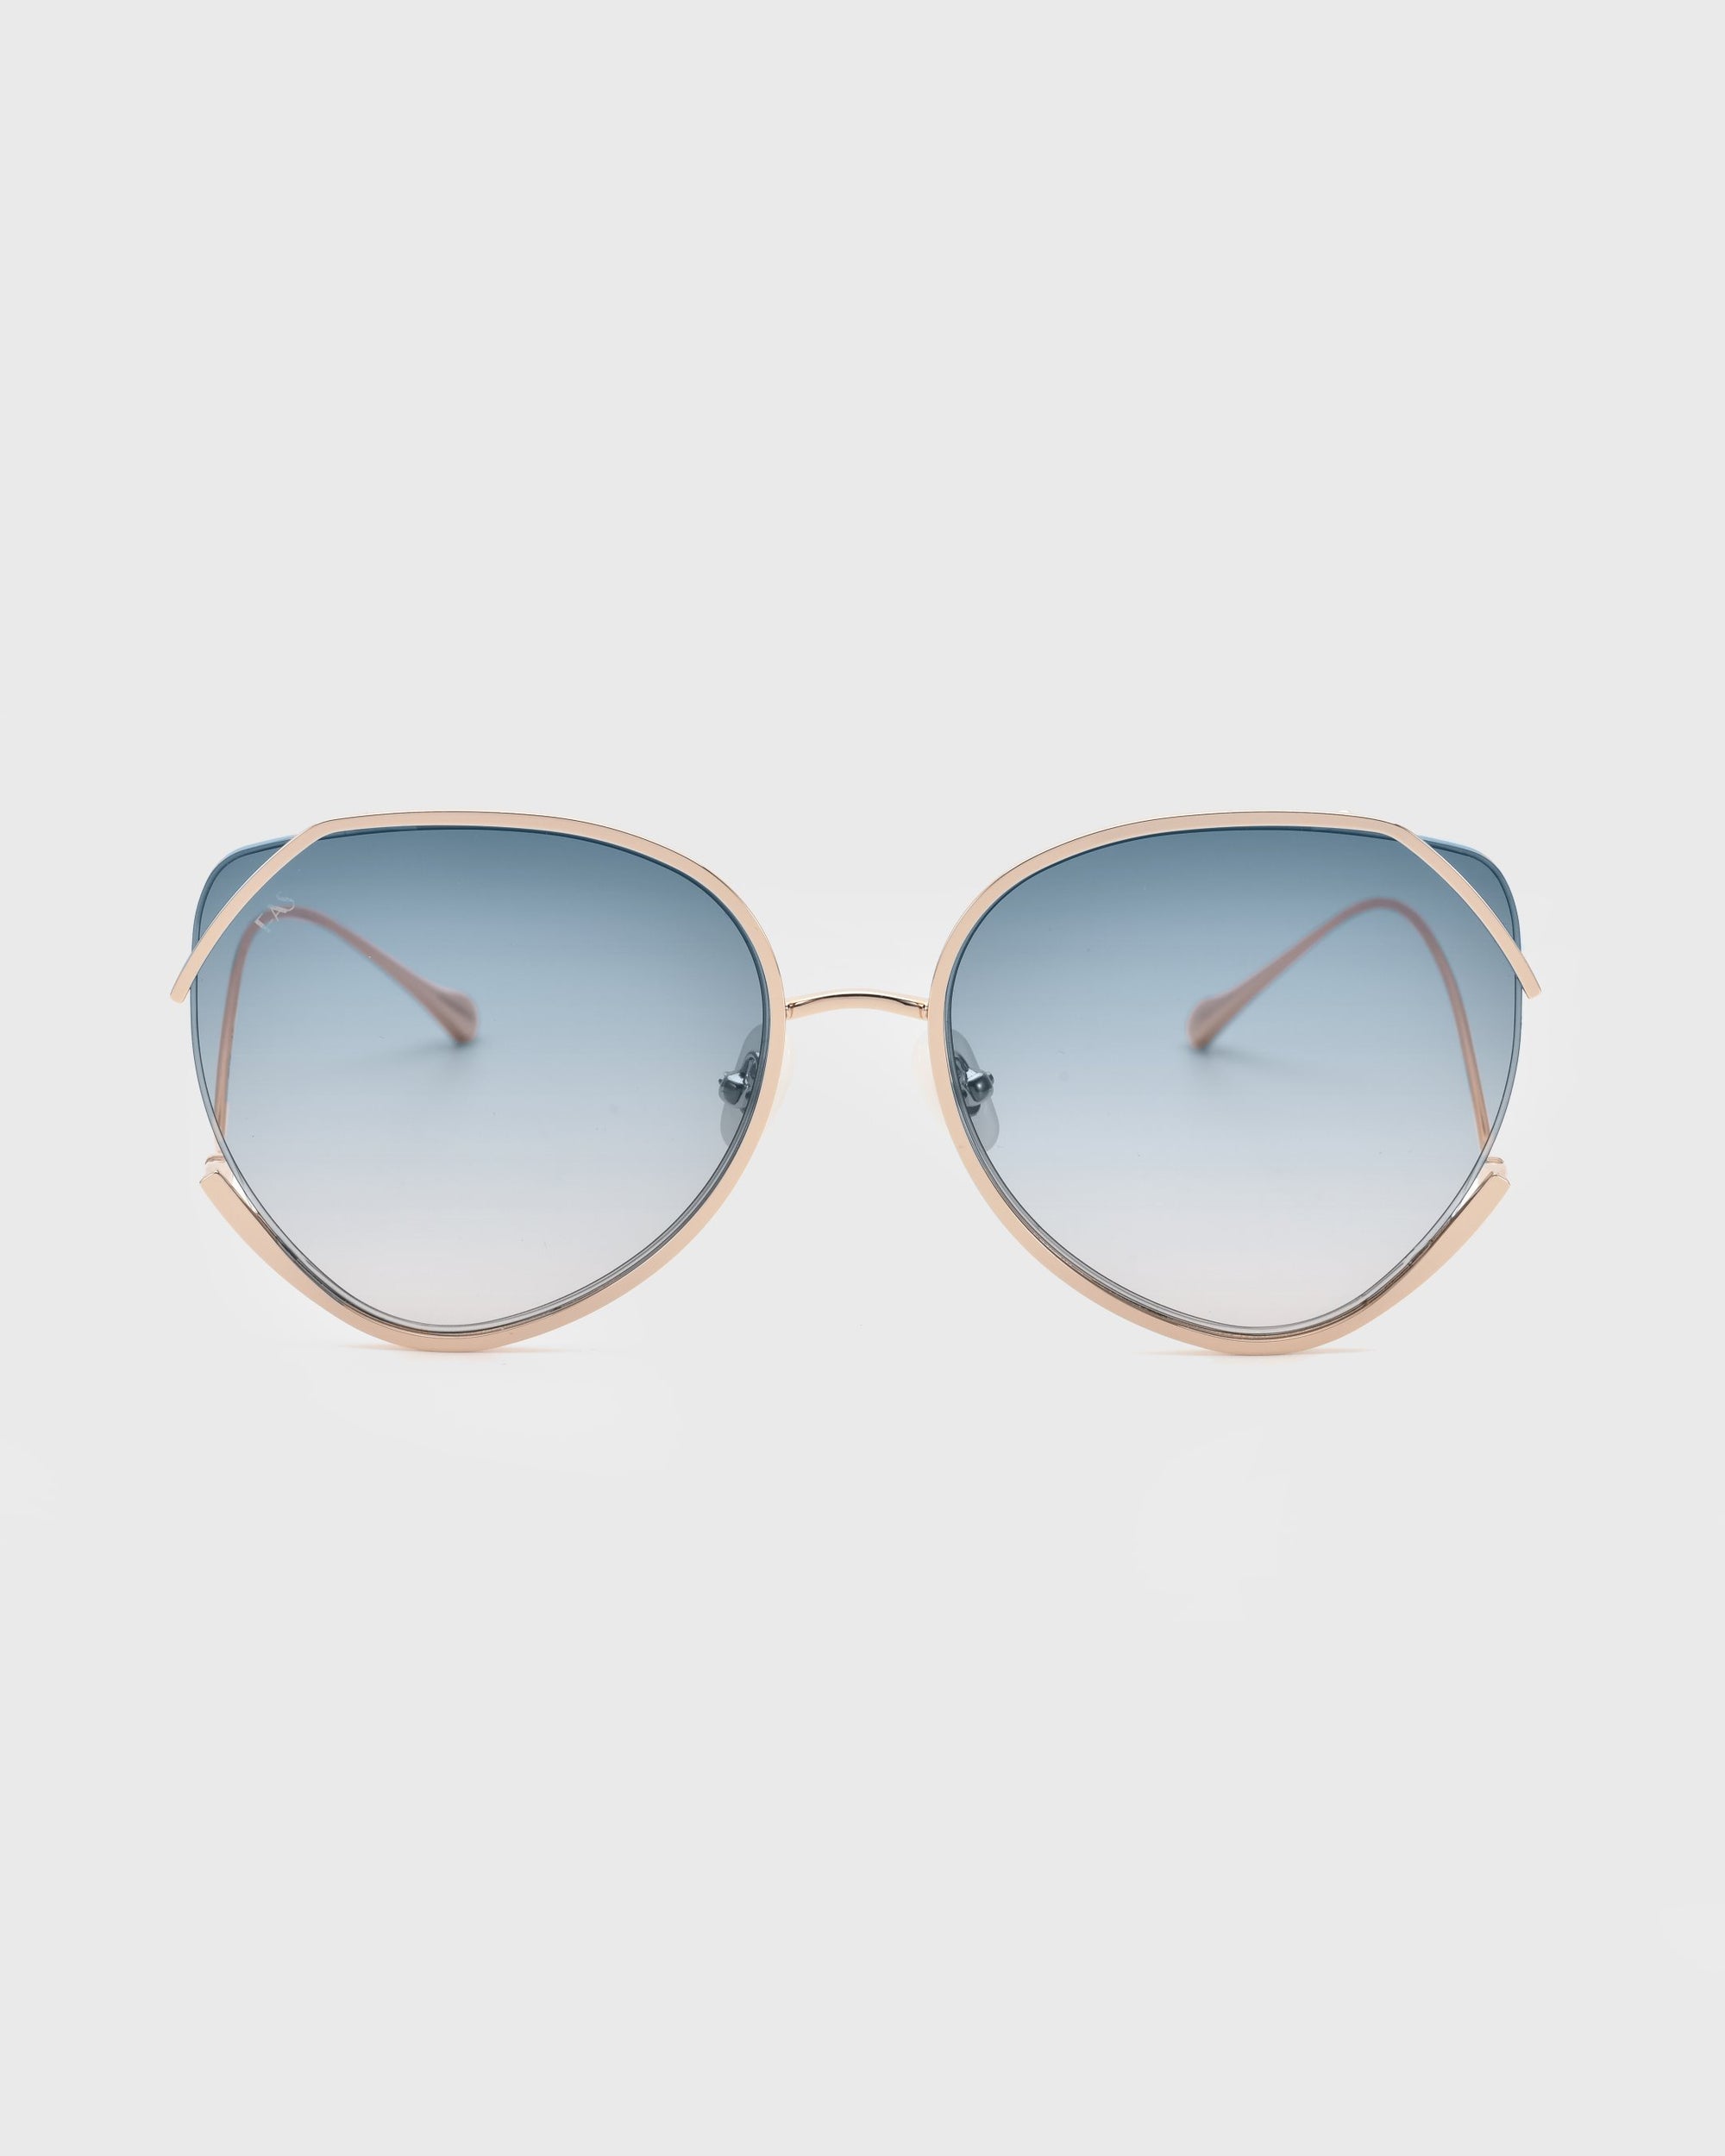 A pair of Wonderland sunglasses by For Art&#39;s Sake® with a thin, light-colored metal frame and large, teardrop-shaped blue gradient lenses. Equipped with jadestone nose pads for added comfort and UV protection, the arms of the glasses are also light-colored and slightly curved. The background is plain and white.